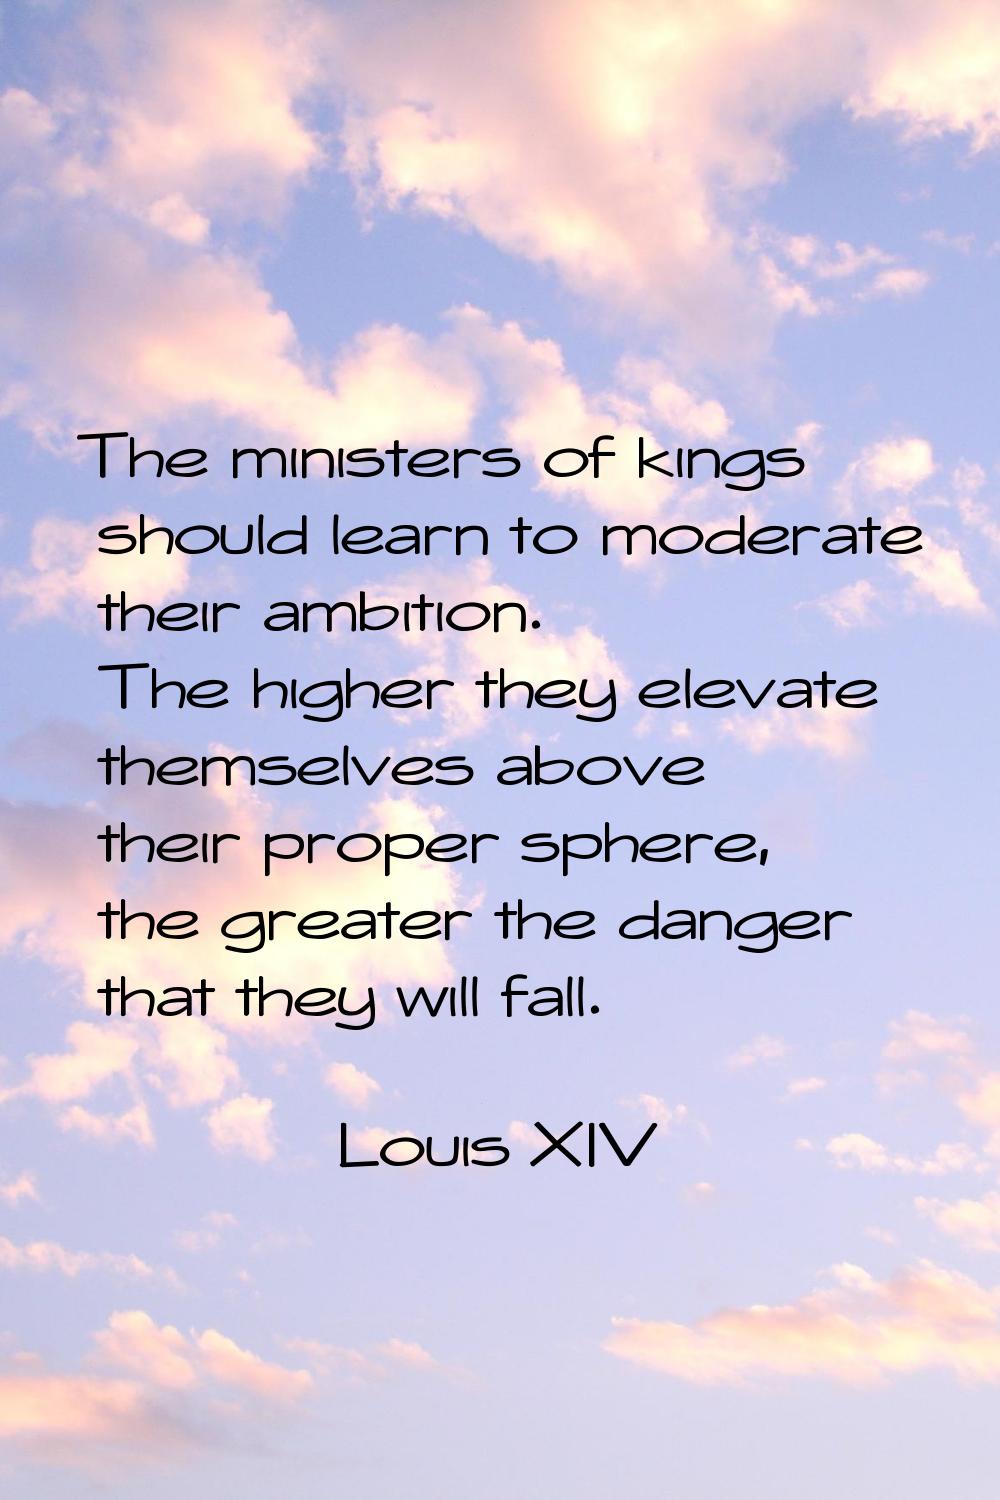 The ministers of kings should learn to moderate their ambition. The higher they elevate themselves 